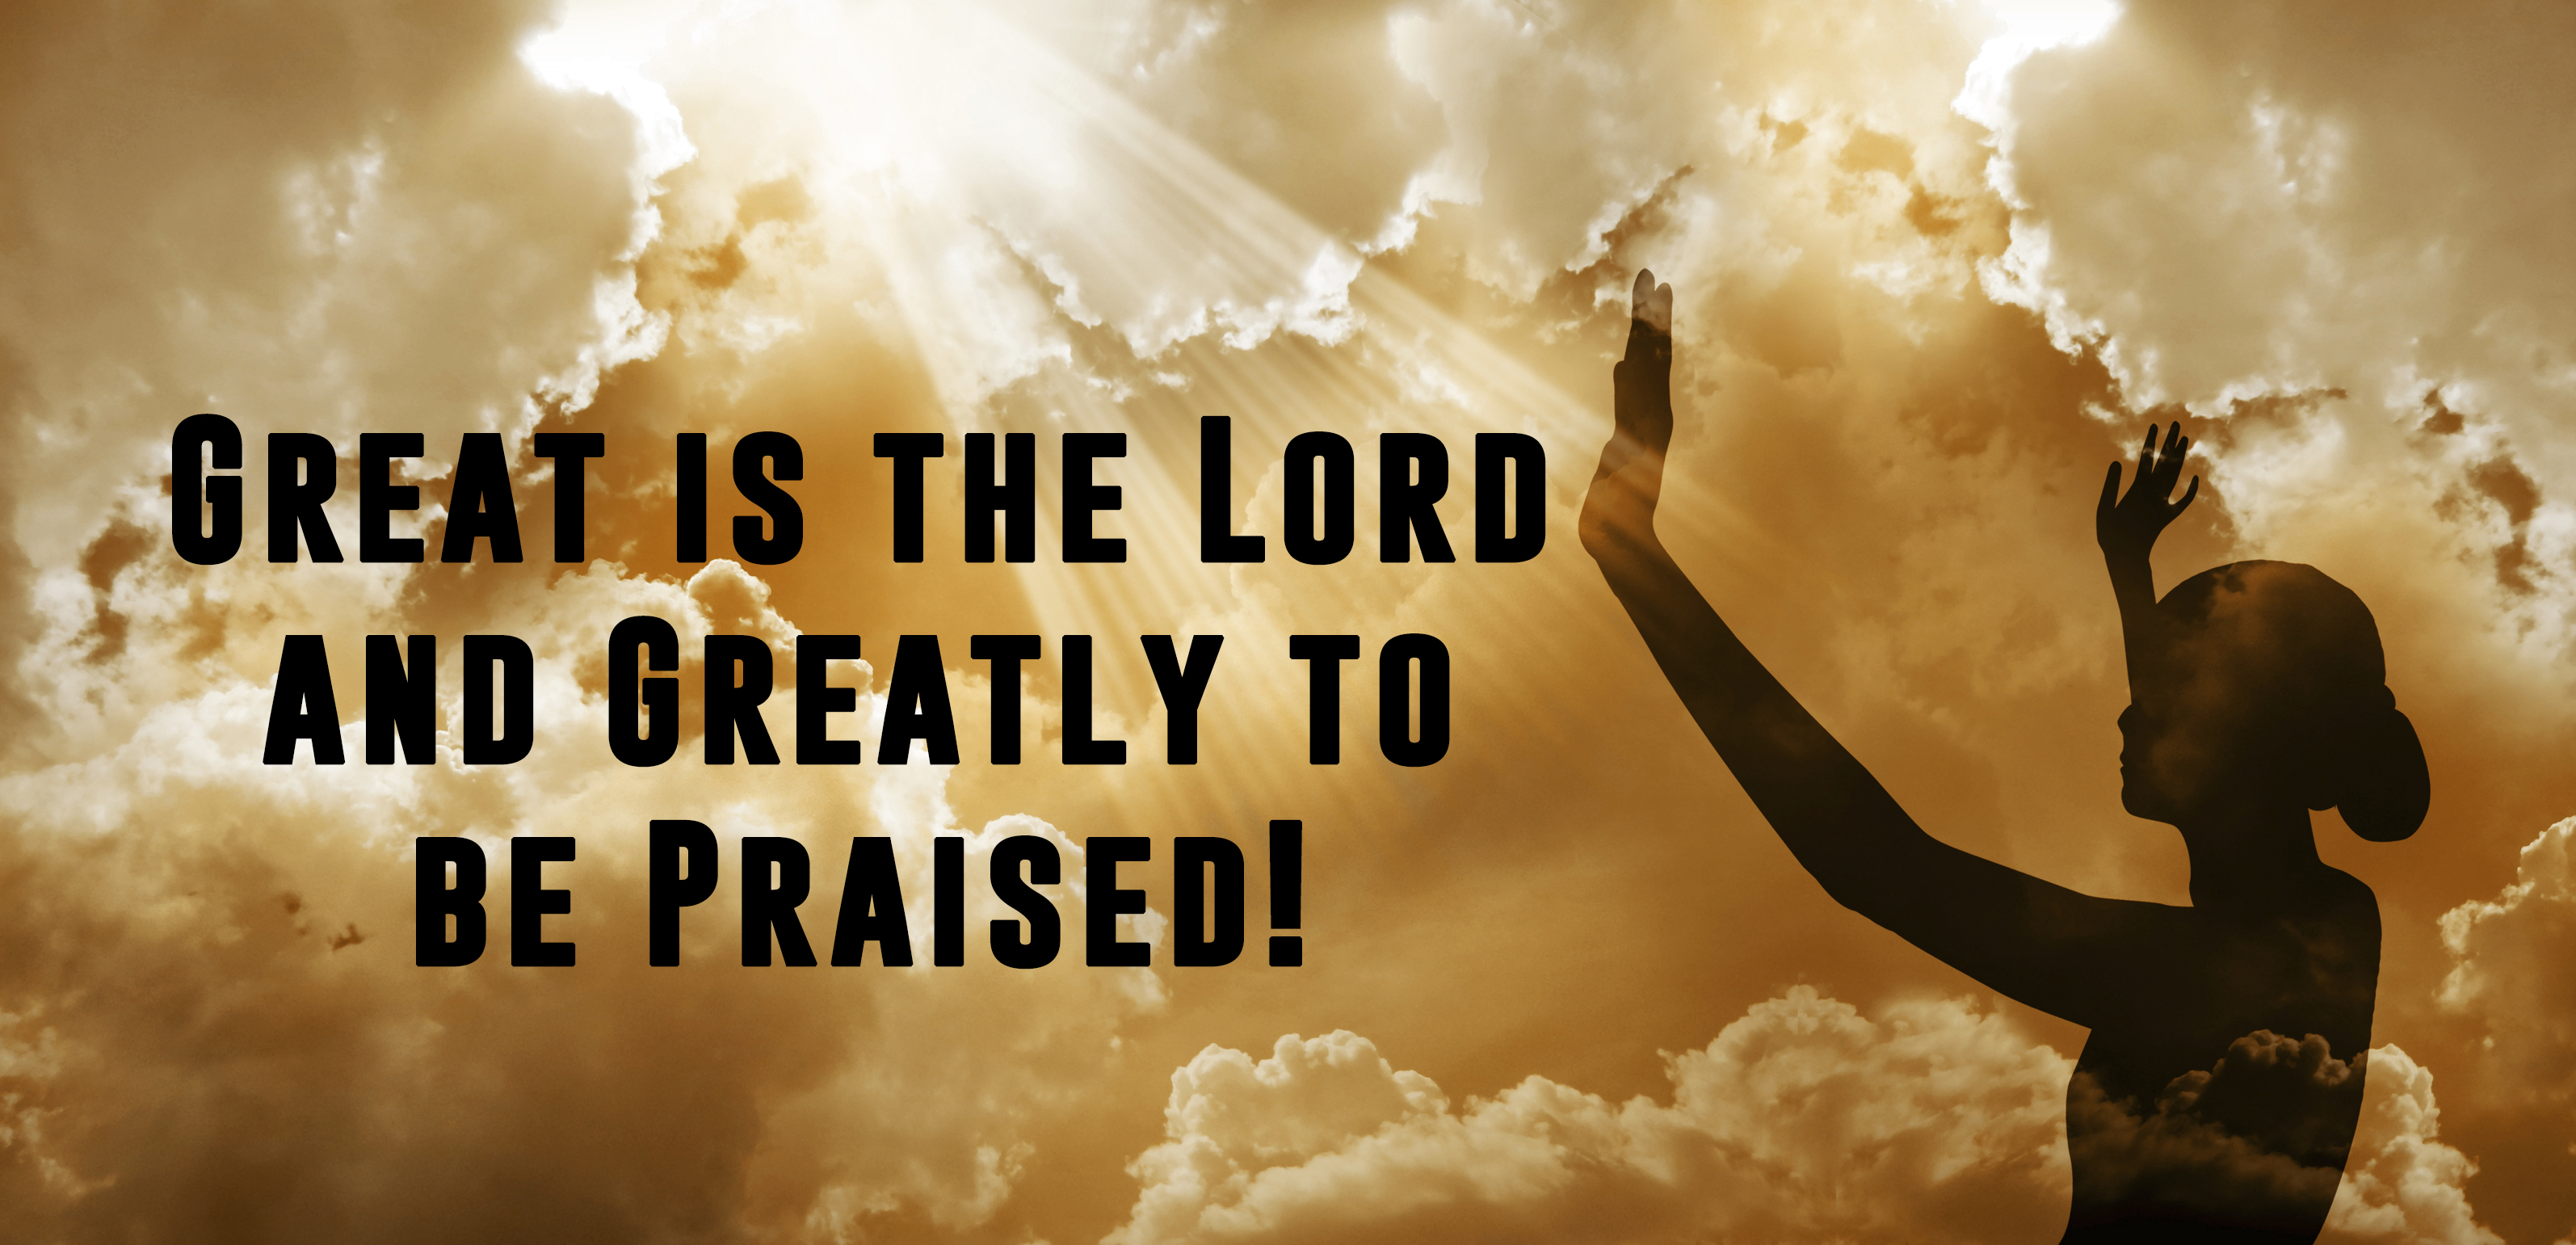 Great is the lord and greatly to be praised verse Great Is The Lord And Greatly To Be Praised